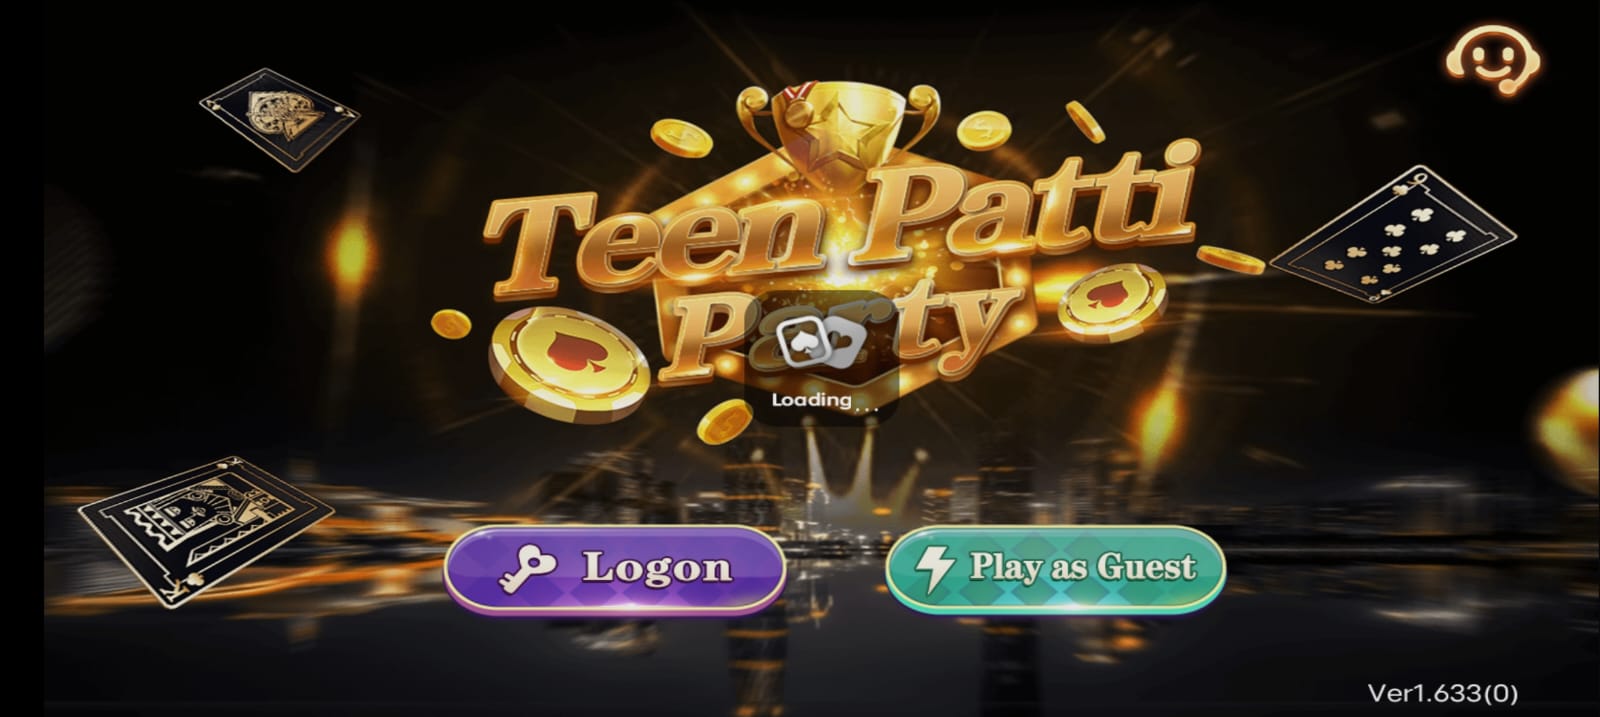 Create An Account In The  Teen Patti Party App